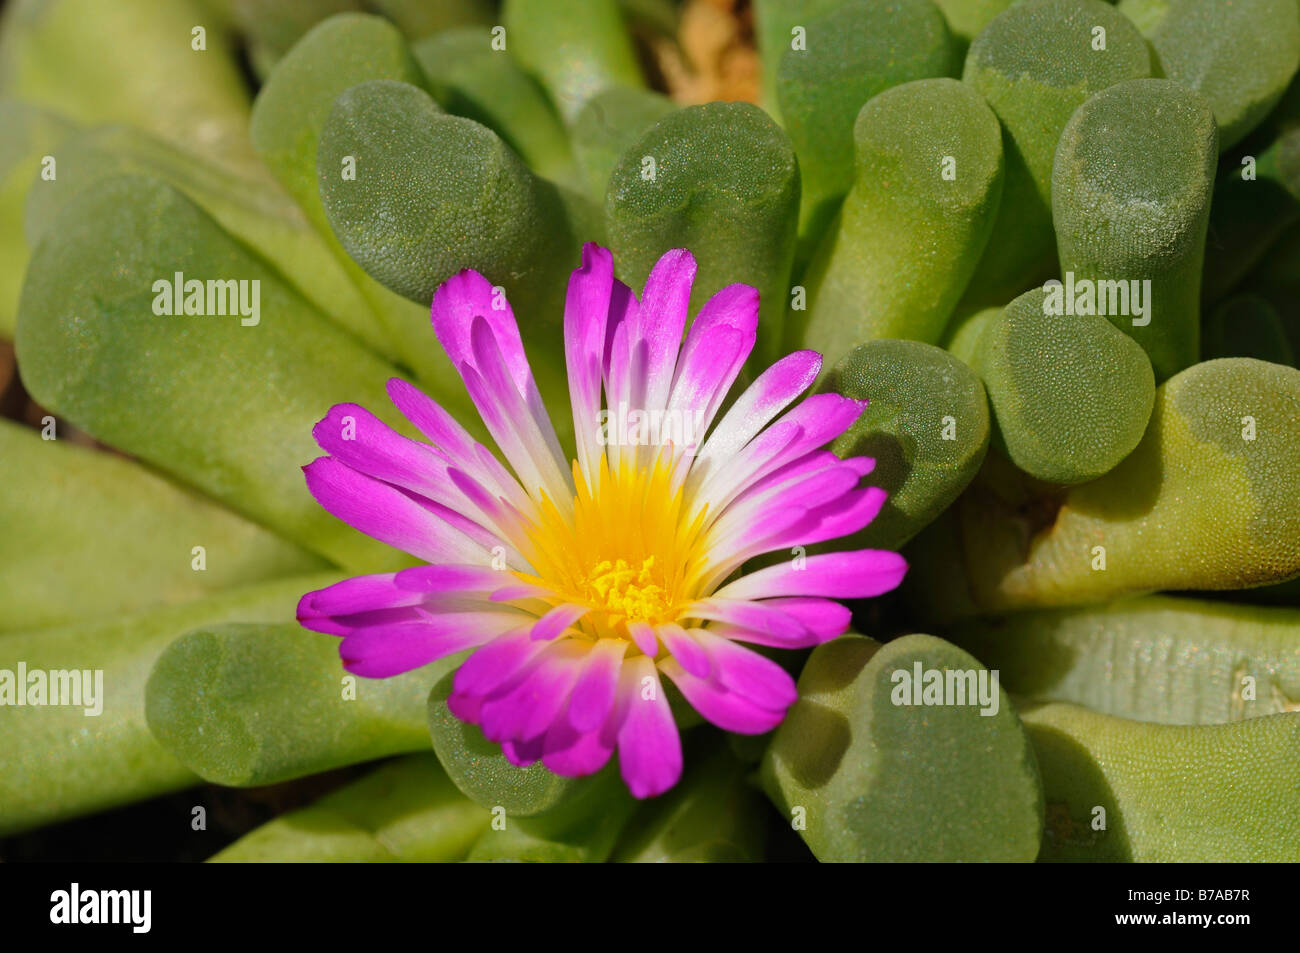 Frithia pulchra (Frithia pulchra), succulent plant from Southern Africa Stock Photo